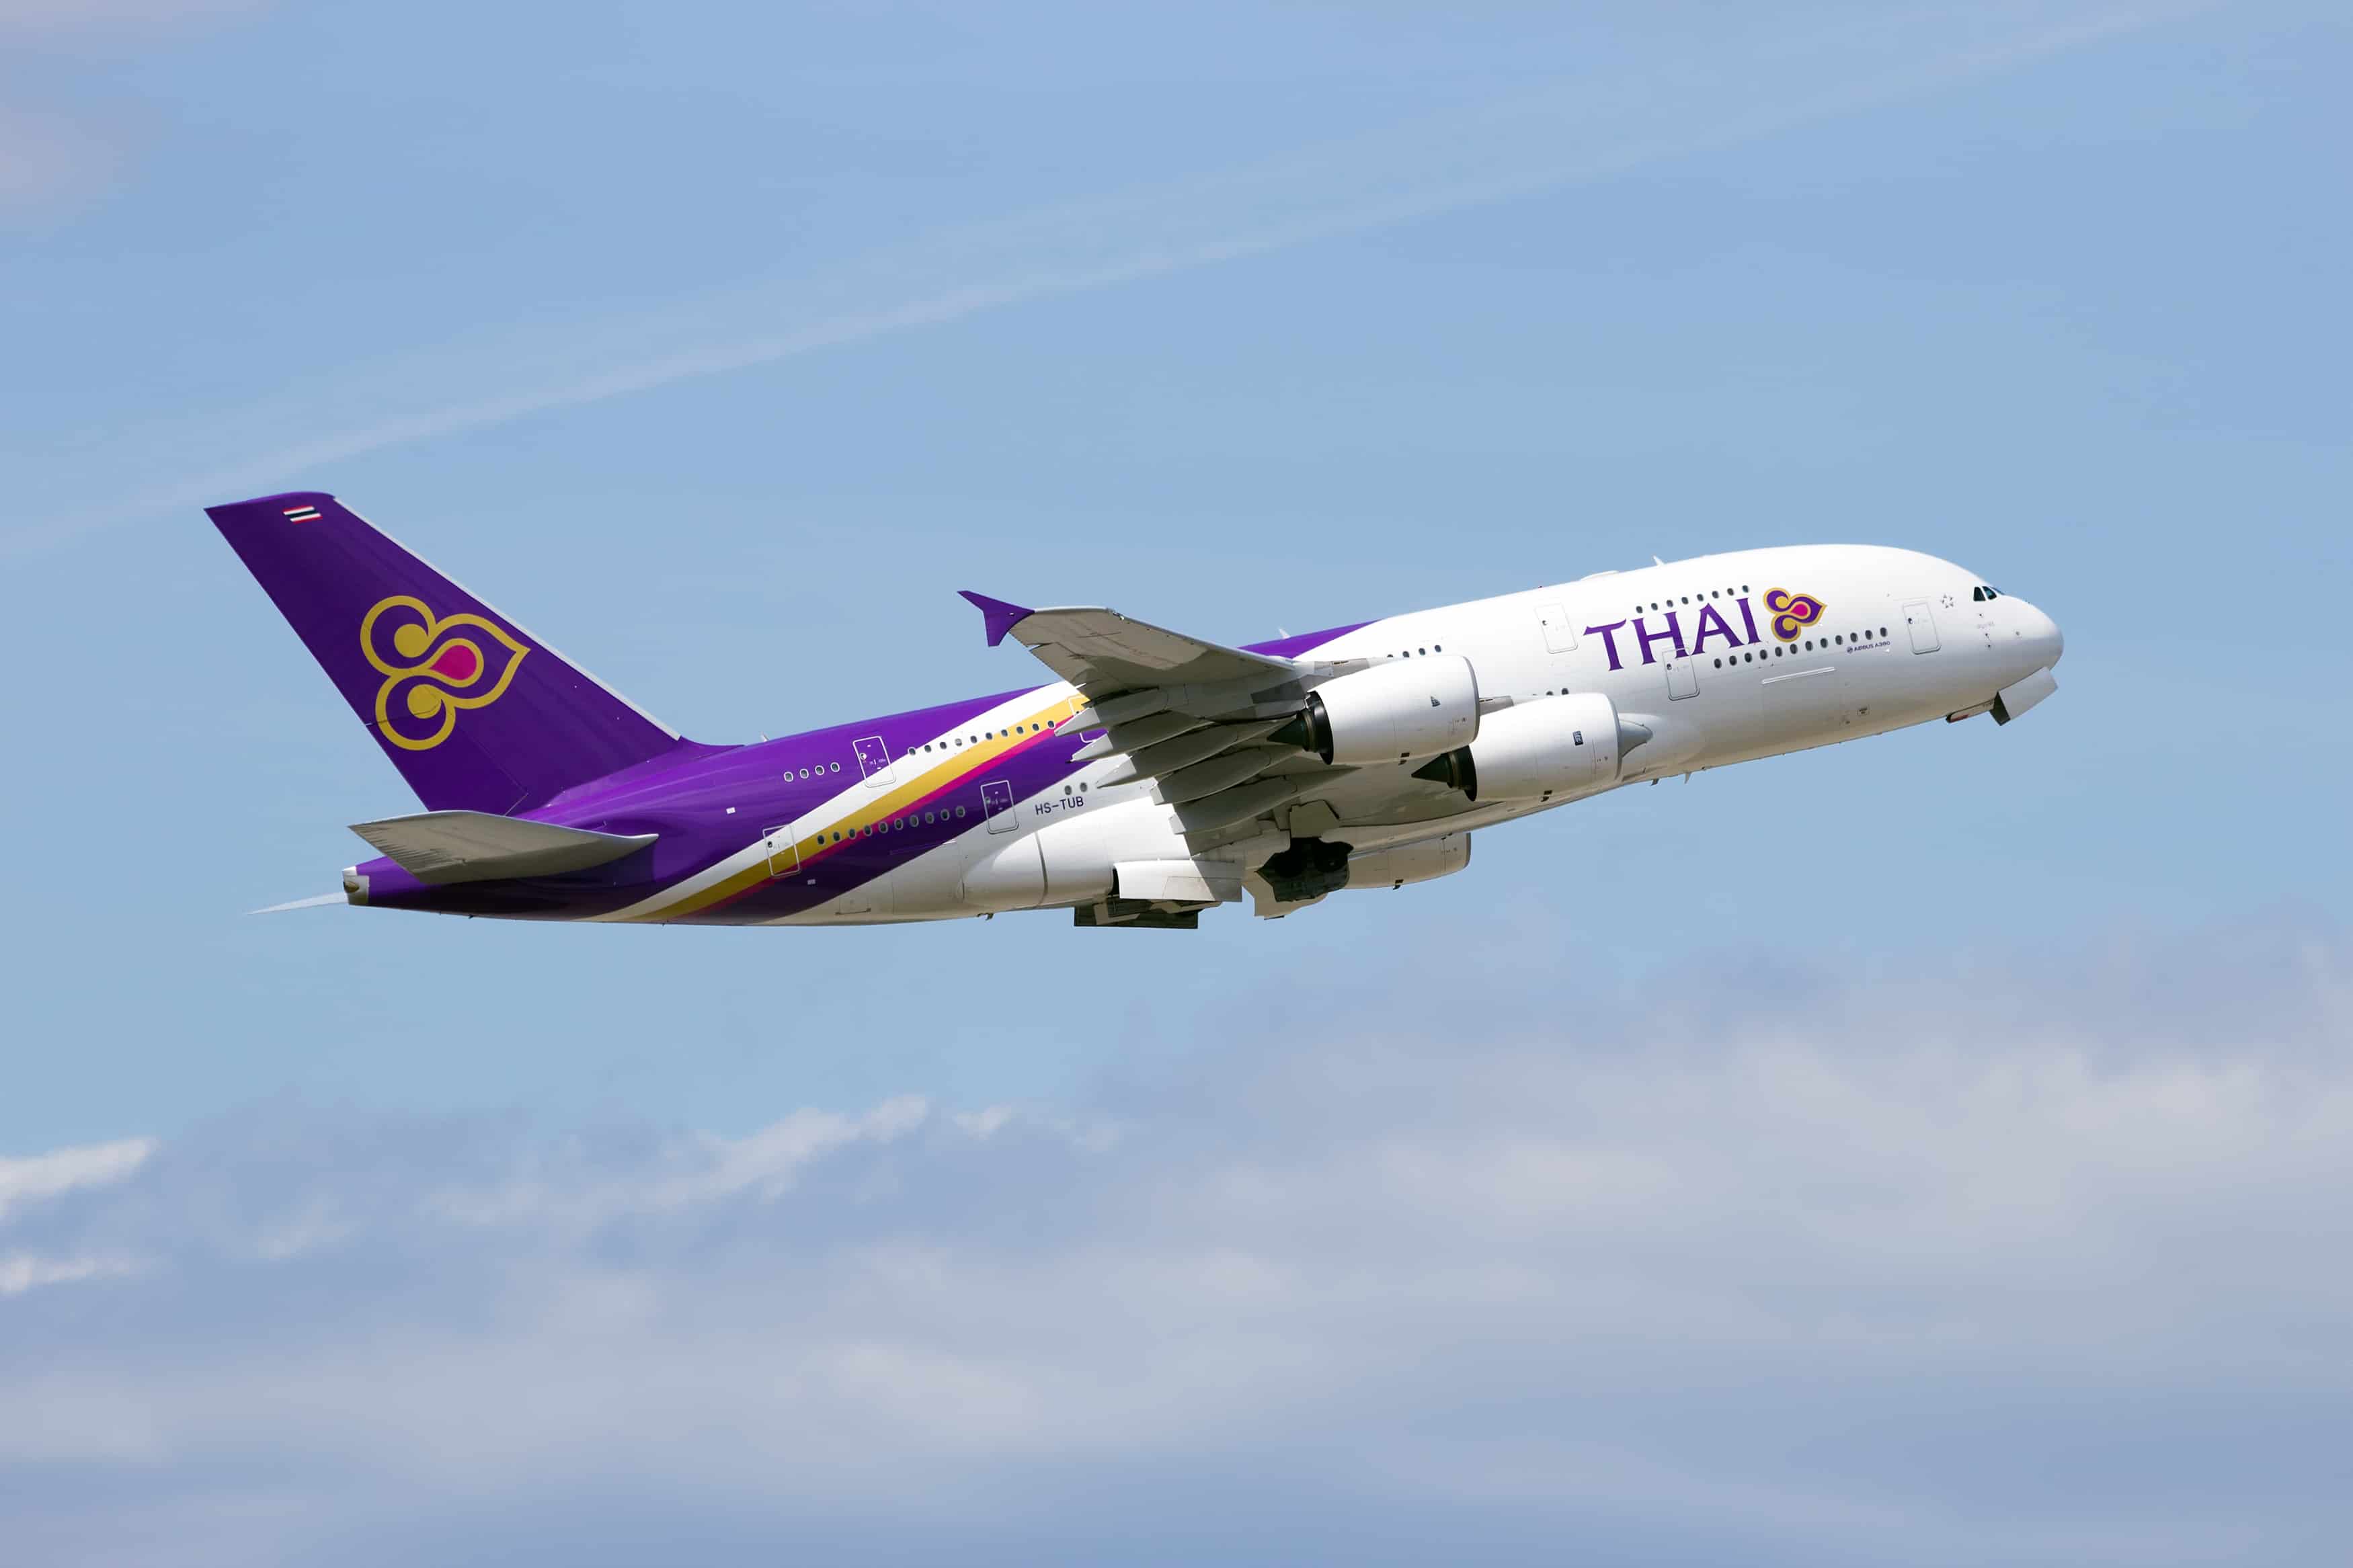 Thai aircraft is taking off